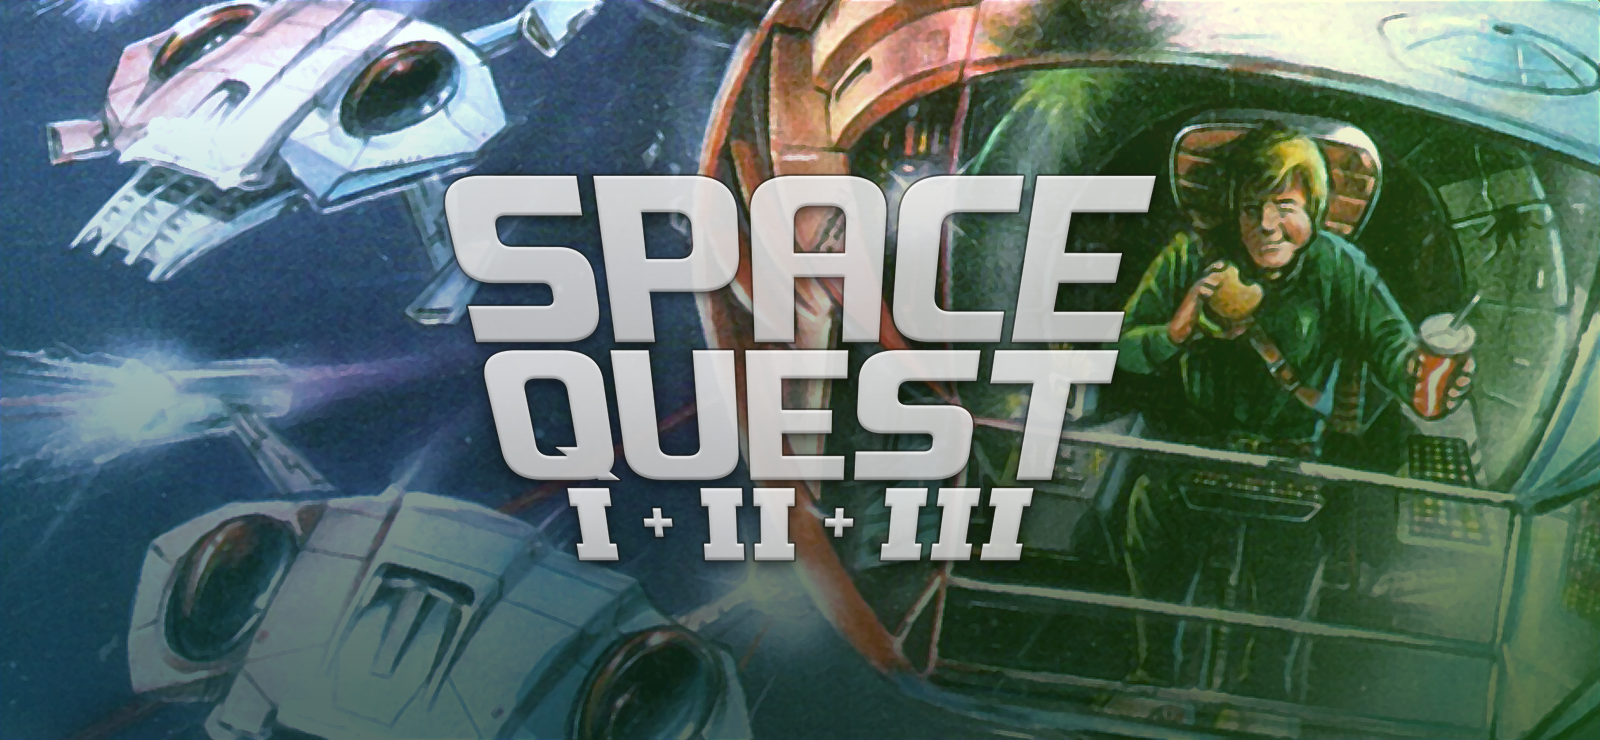 Space Quest 1+2+3